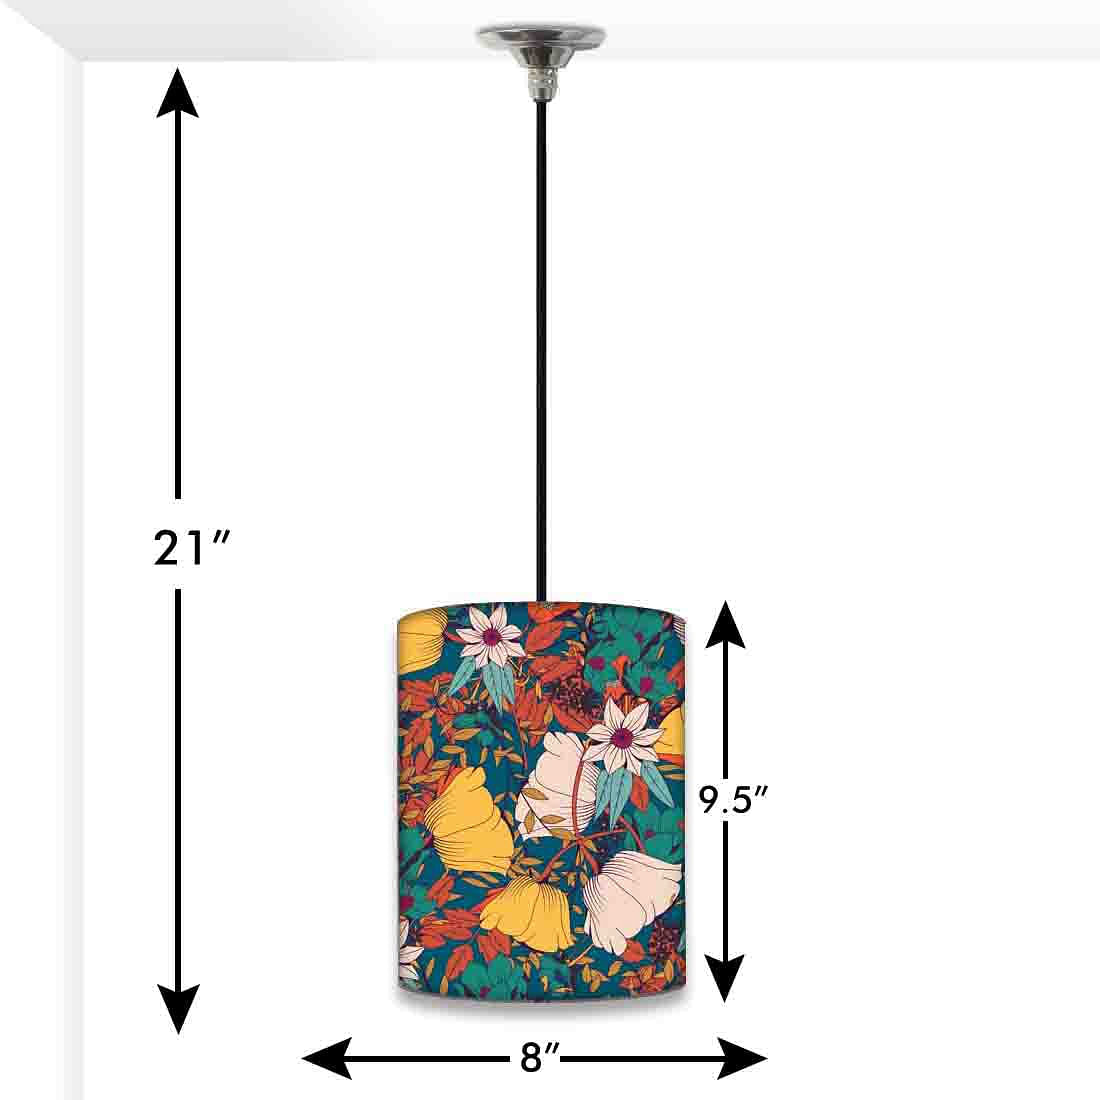 Hanging Lamps for Ceiling for Living Room - 0033 Nutcase